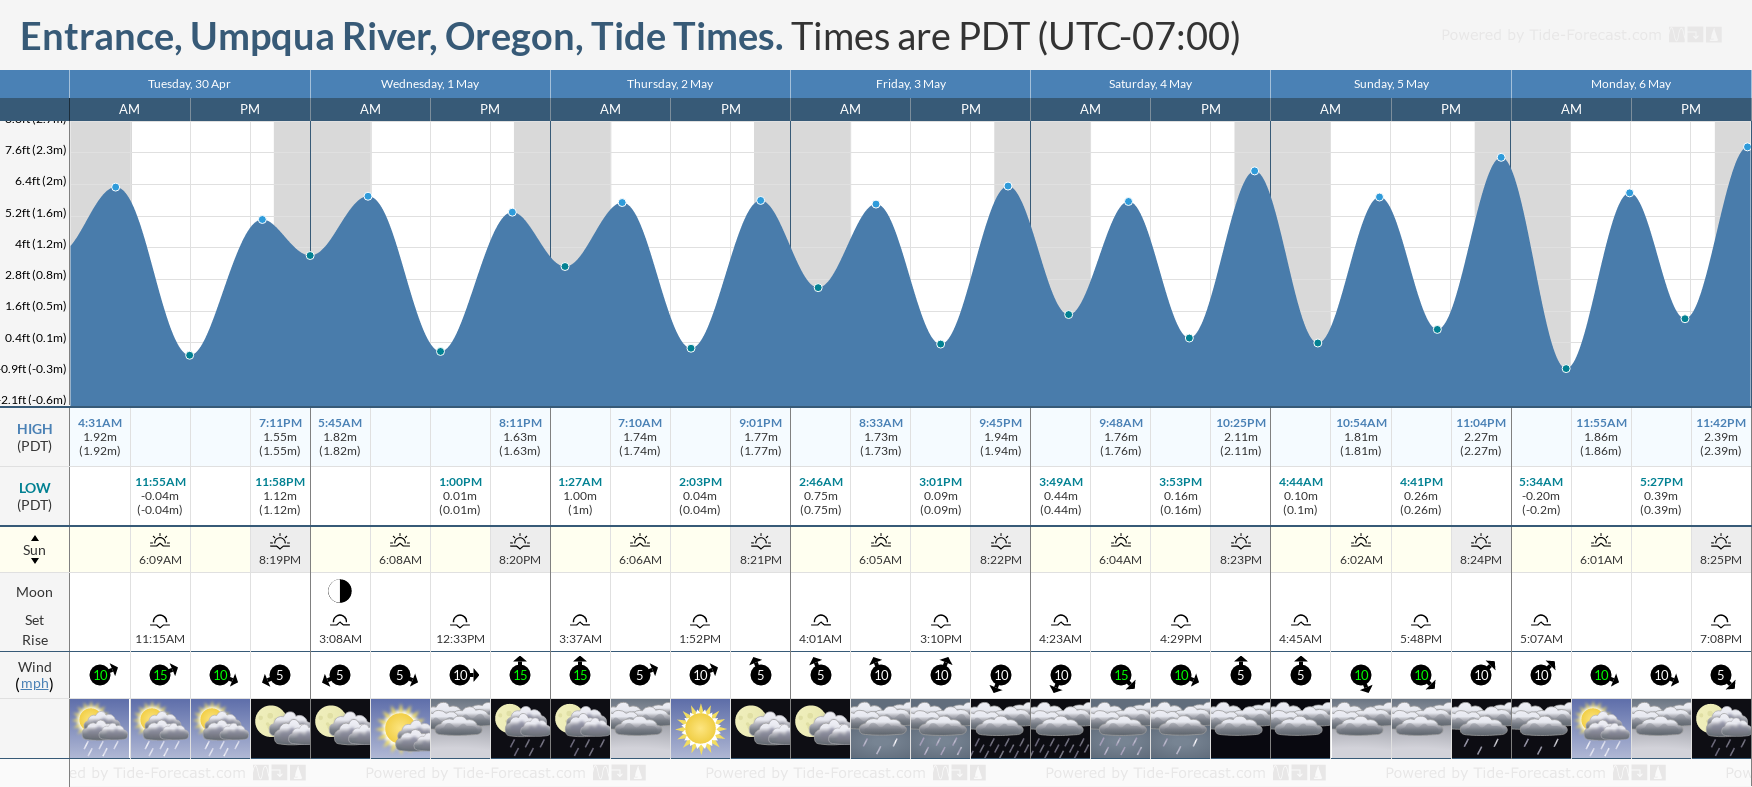 Entrance, Umpqua River, Oregon Tide Chart including high and low tide times for the next 7 days